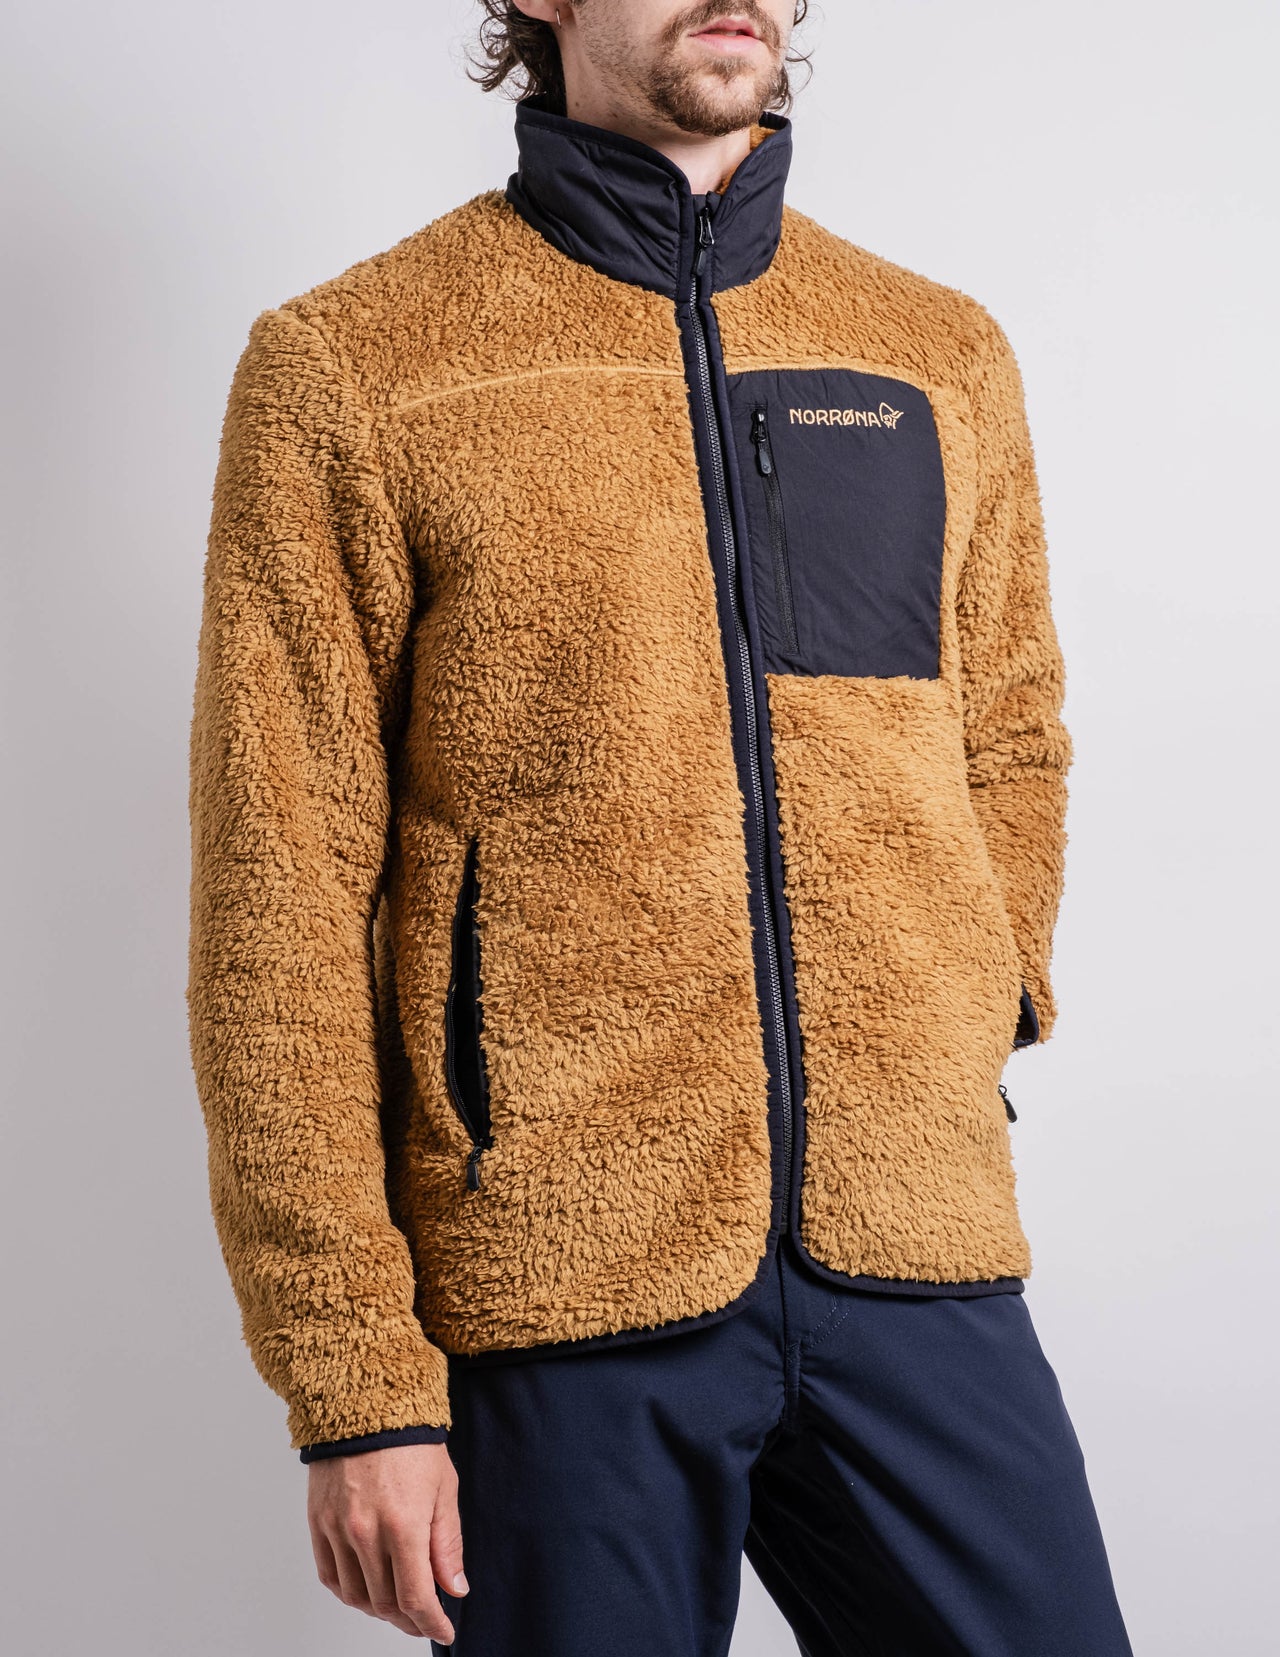 warm3 Jacket in Camelflage